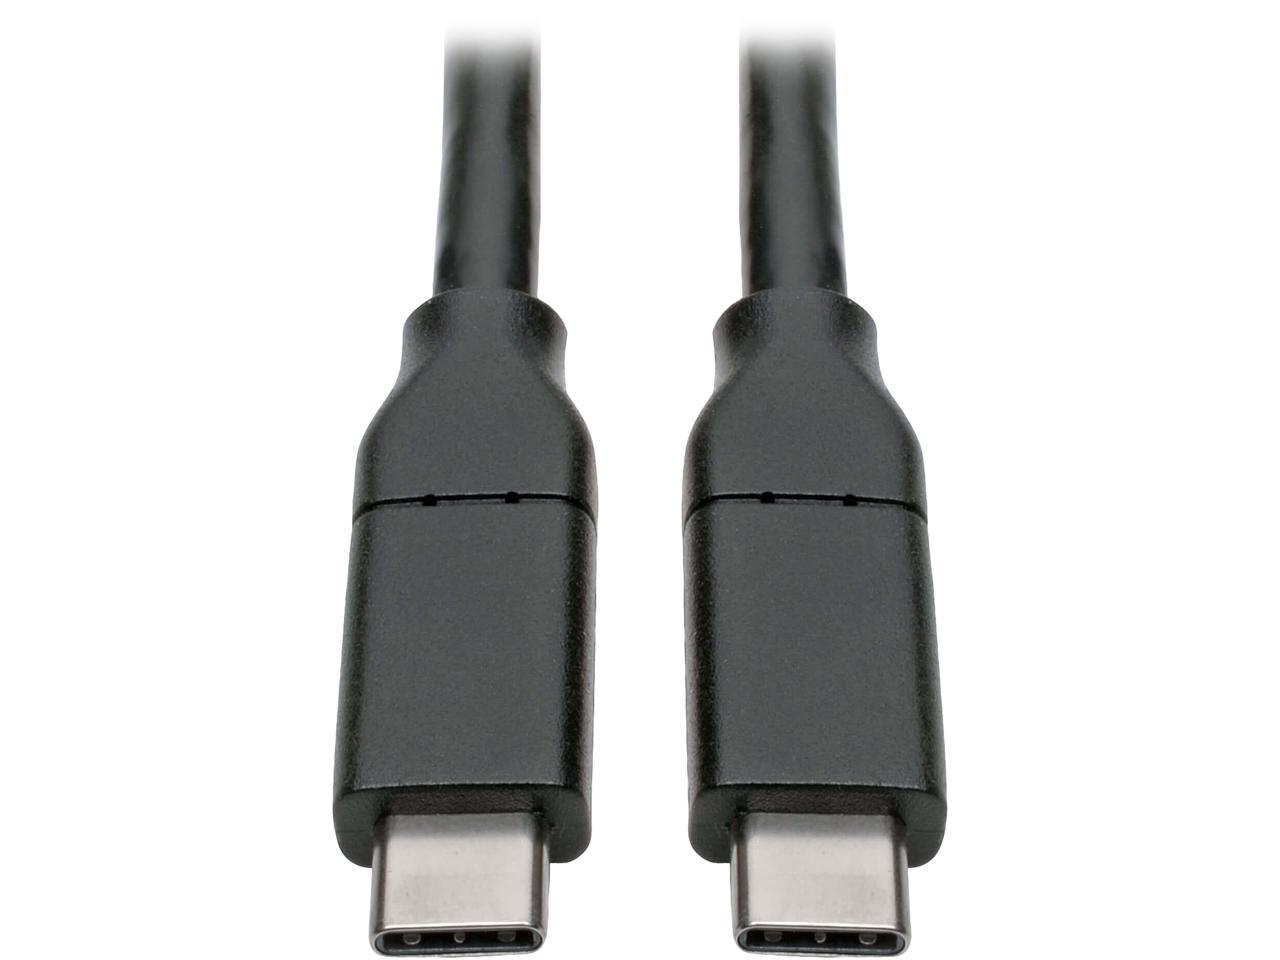 U040-C13-C-5A PD Charging Cable 5A 13 ft M/M Thunderbolt 3 Cable 480 Mbps USB IF Certified Tripp Lite USB C to USB C Cable USB 2.0 100W